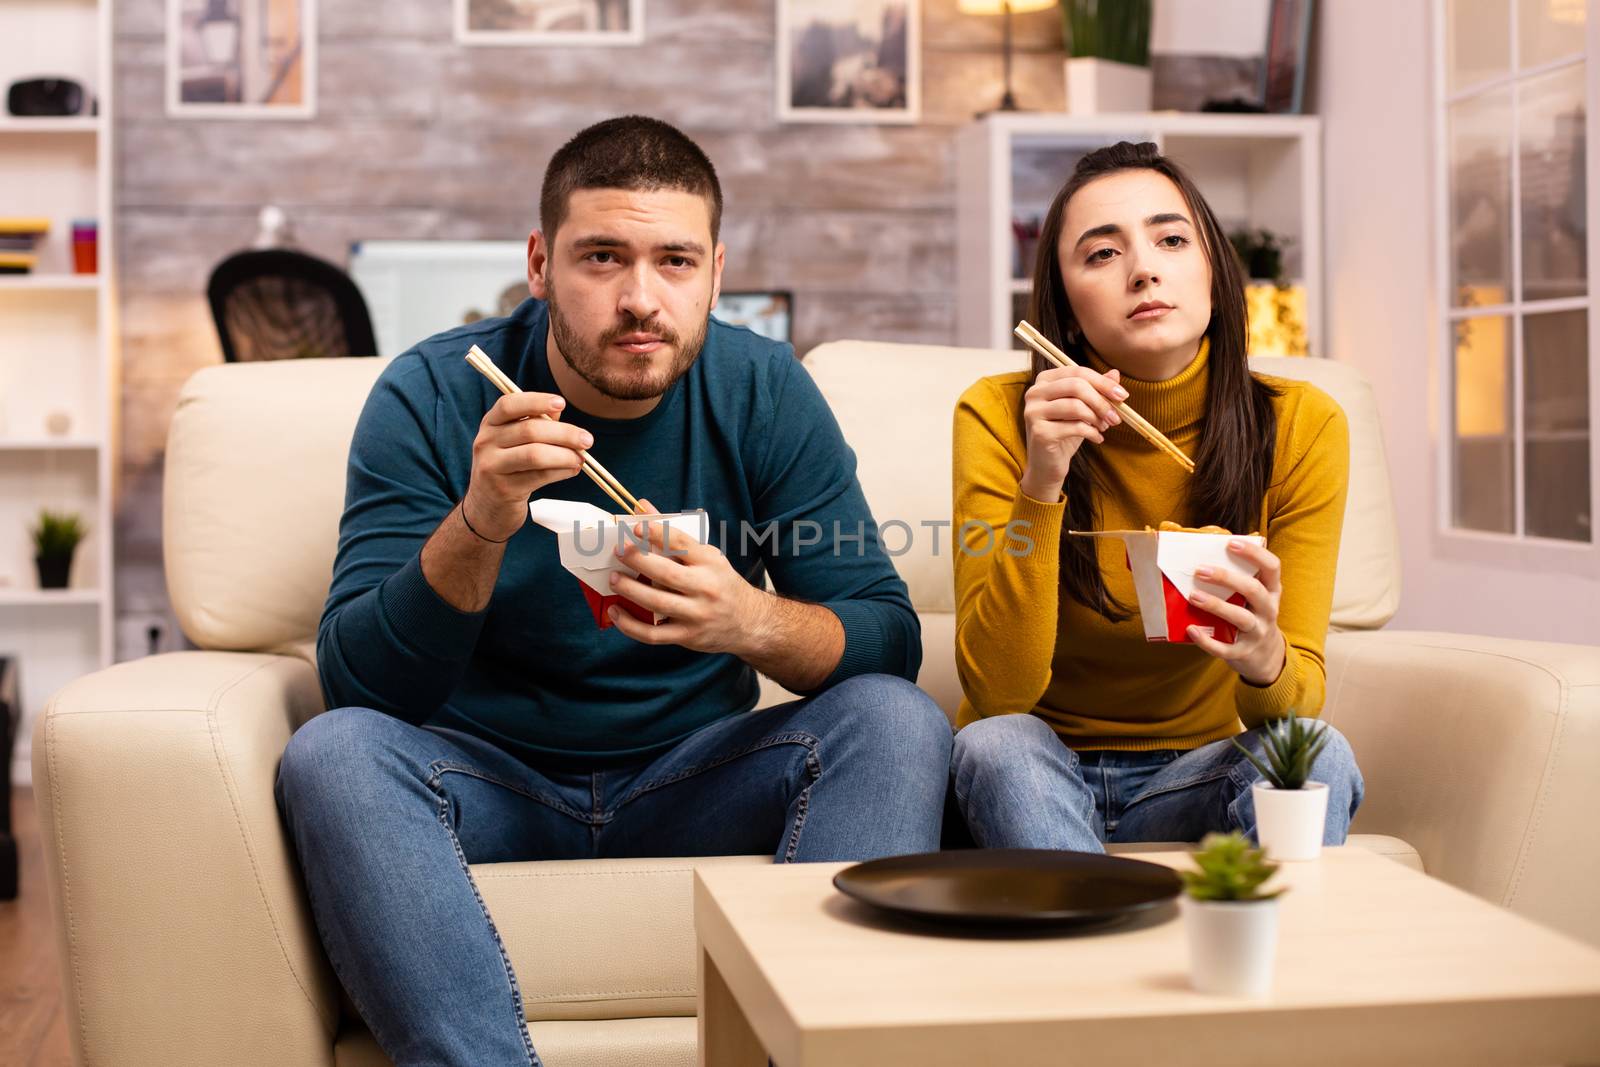 In modern cozy living room couple is enjoying takeaway noodles while watching TV by DCStudio